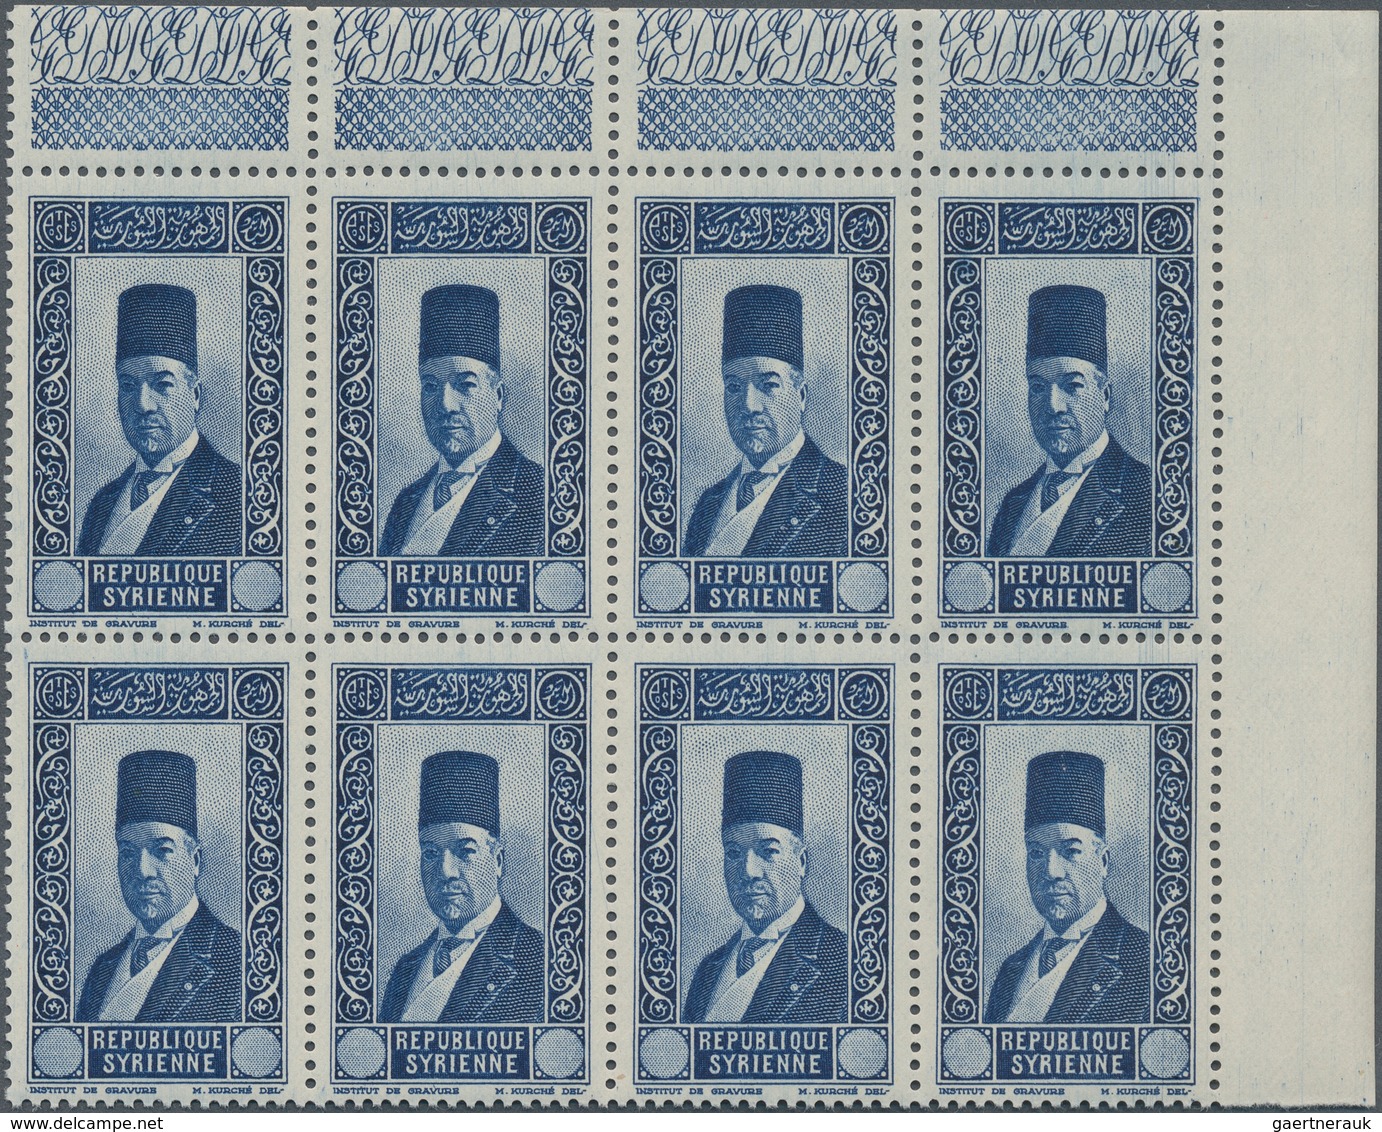 Syrien: 1934, 10 Years Republic (15pi.) Dark Blue (president Mohammed Ali Abed) WITHOUT DENOMINATION - Syrie